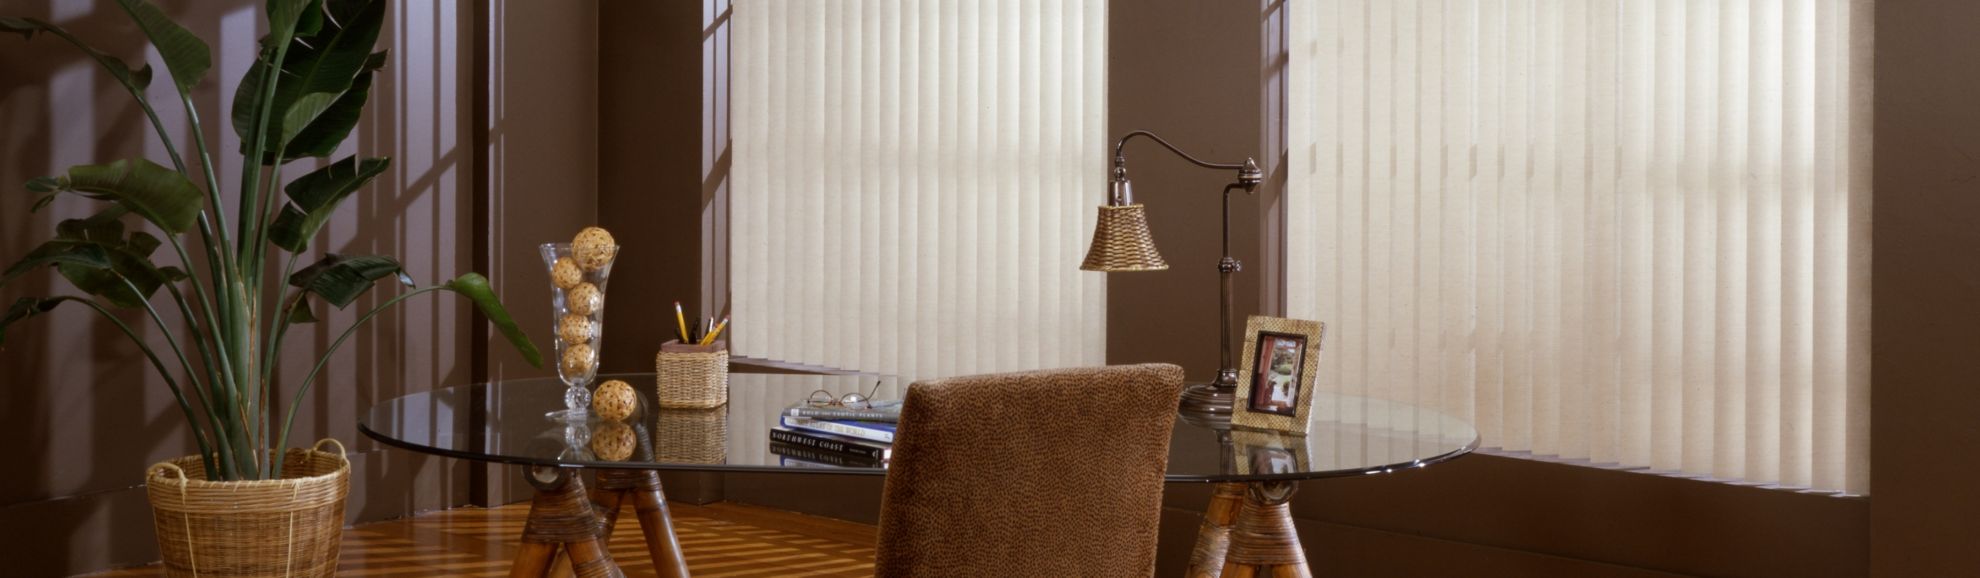 Vertical Blinds - Stonegate Off White 1002 - Study